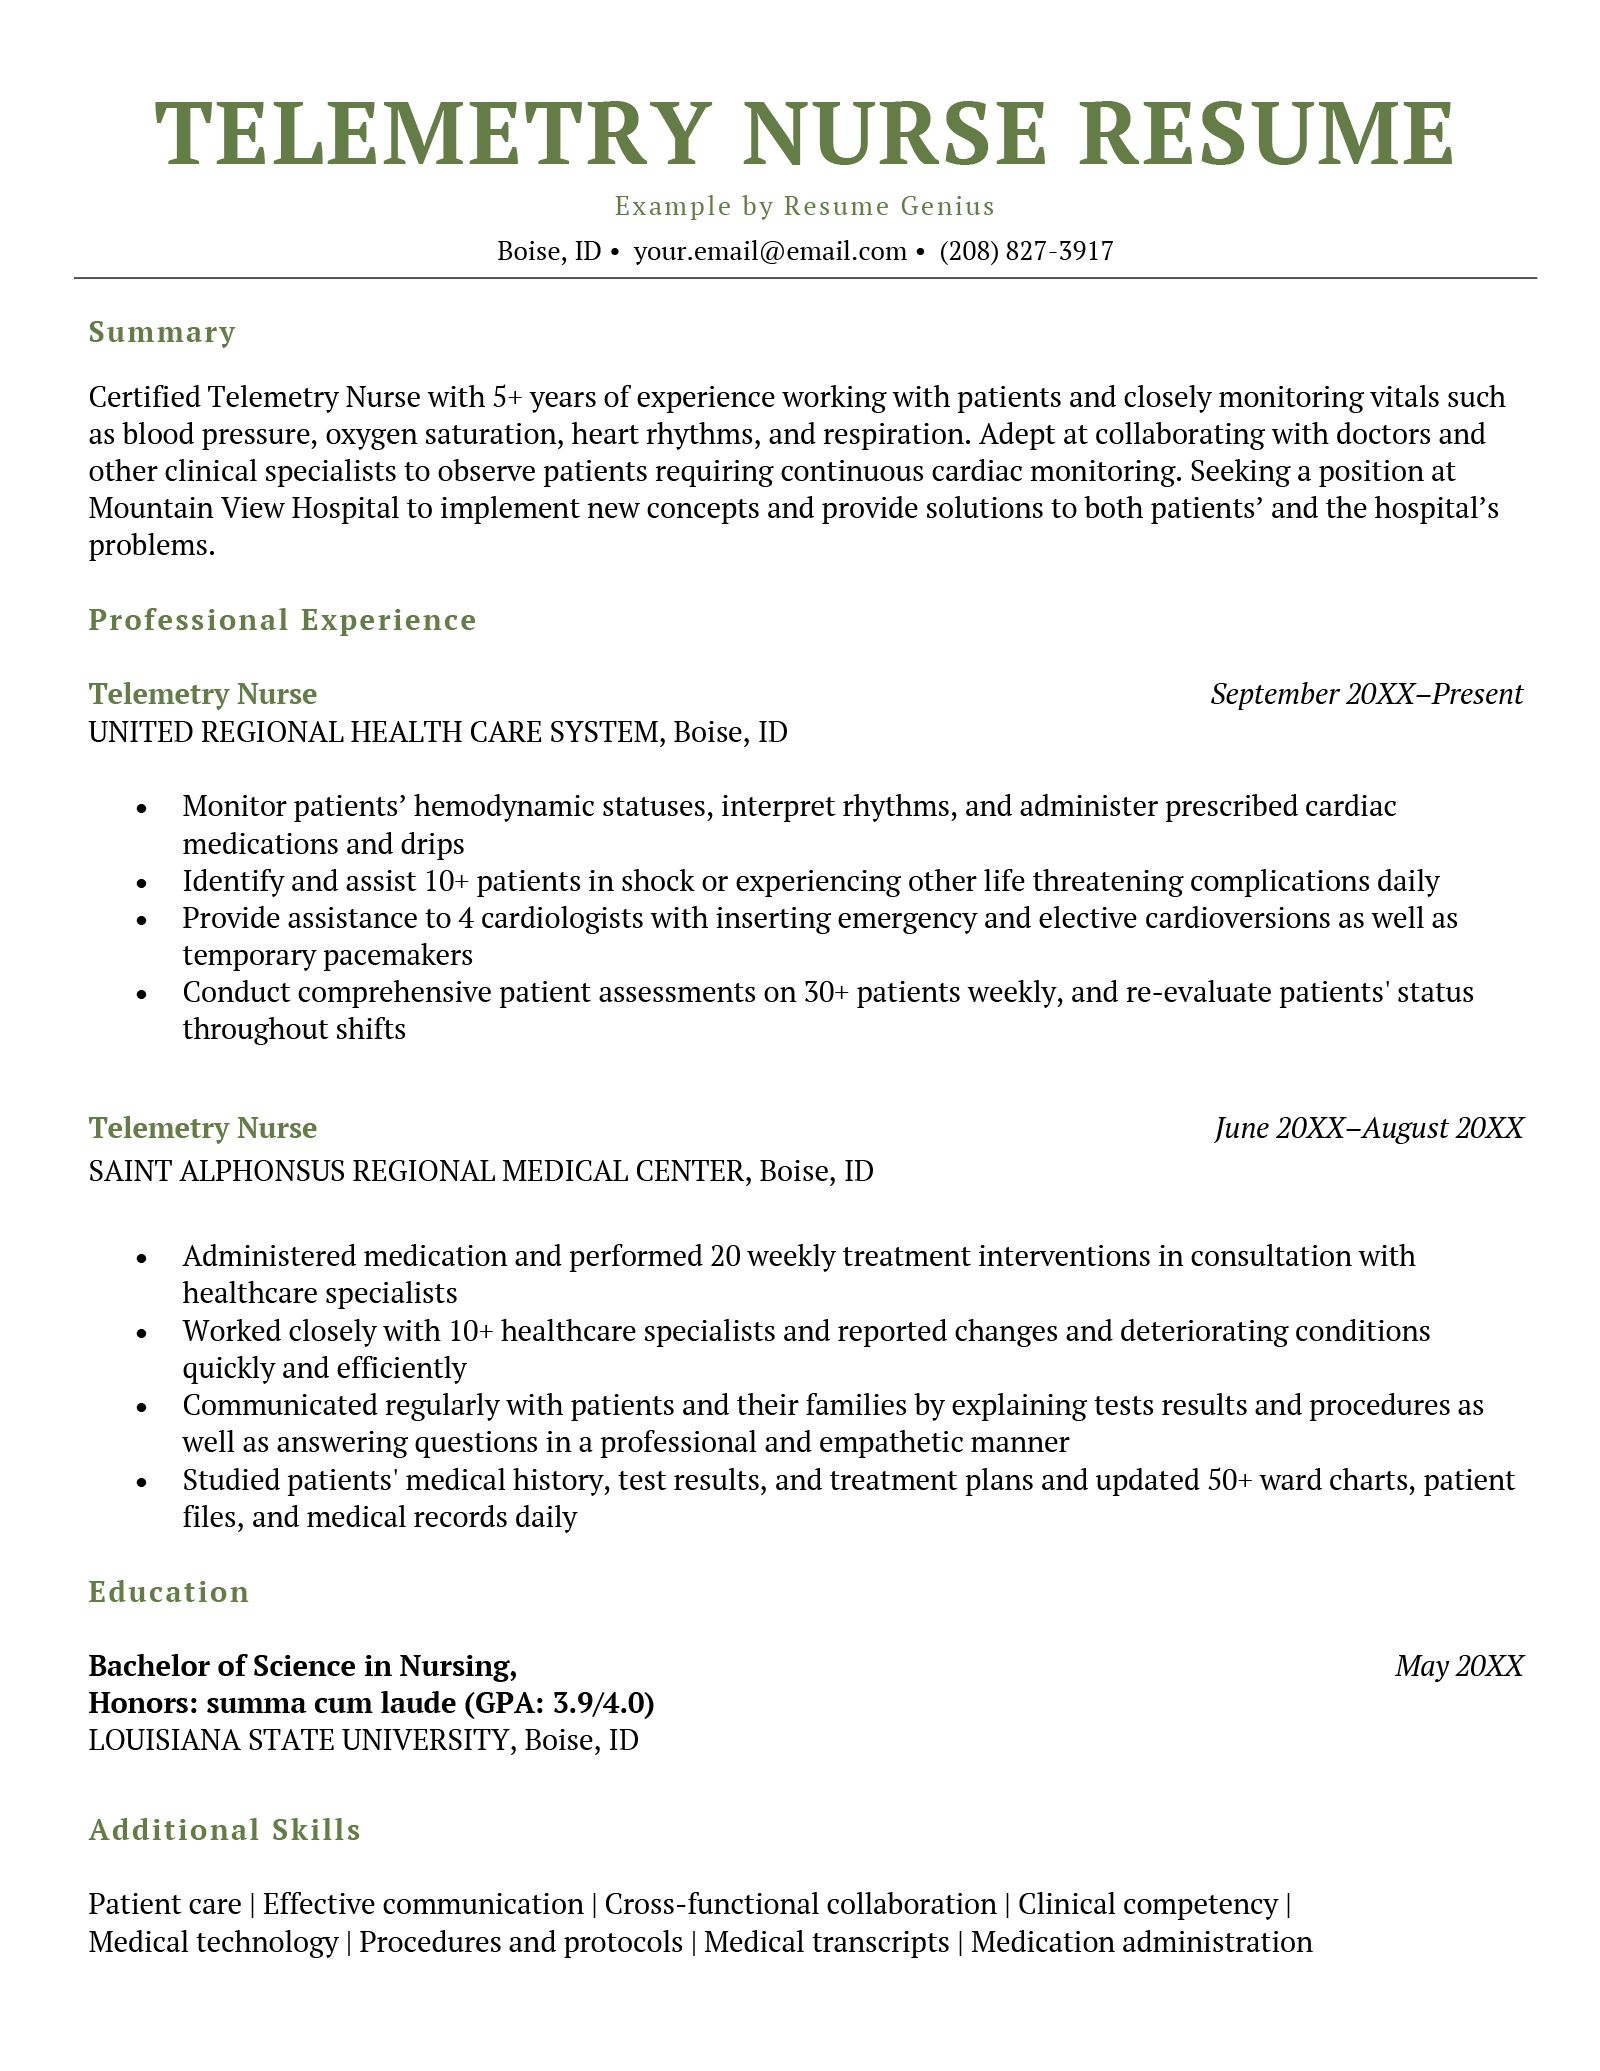 An example of a simple and professional telemetry nurse resume with a horizontal header and green font